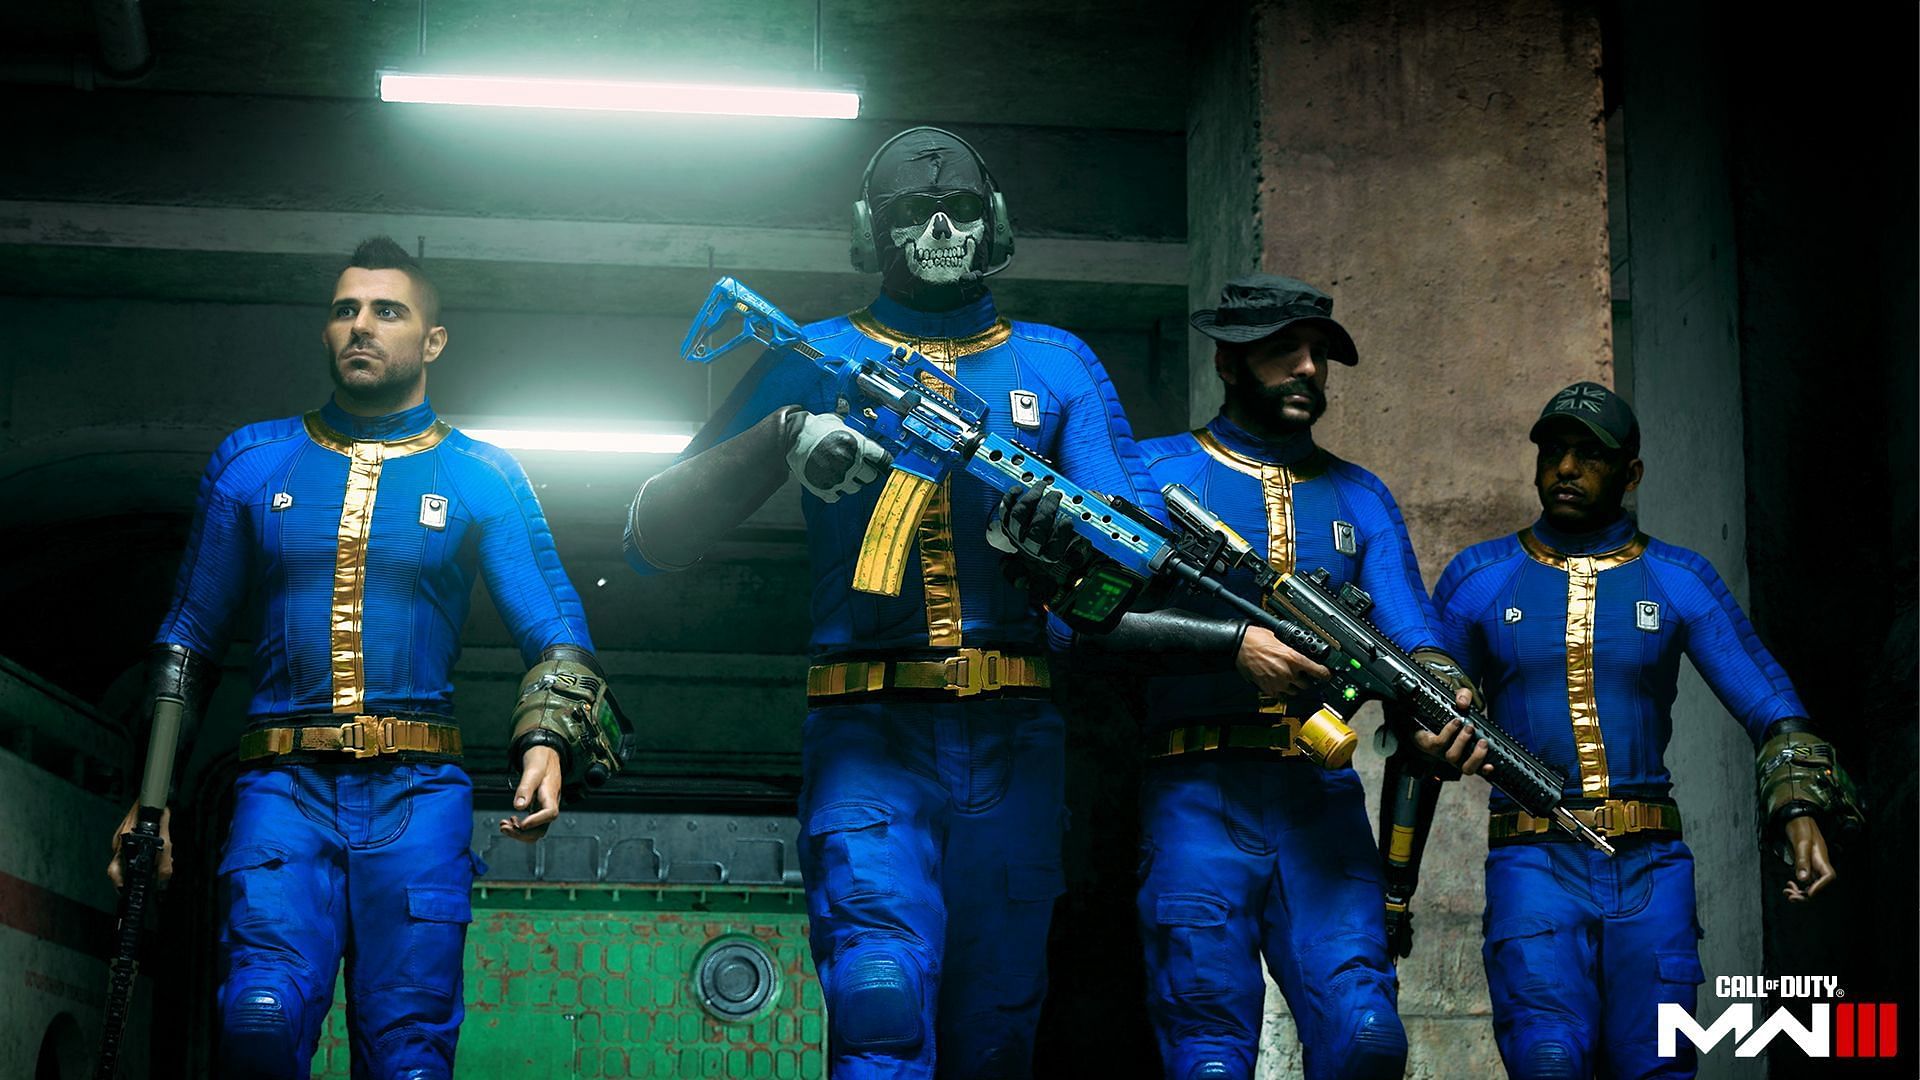 Fallout Vault Dweller Tracer Pack in Call of Duty (Image via Activision)